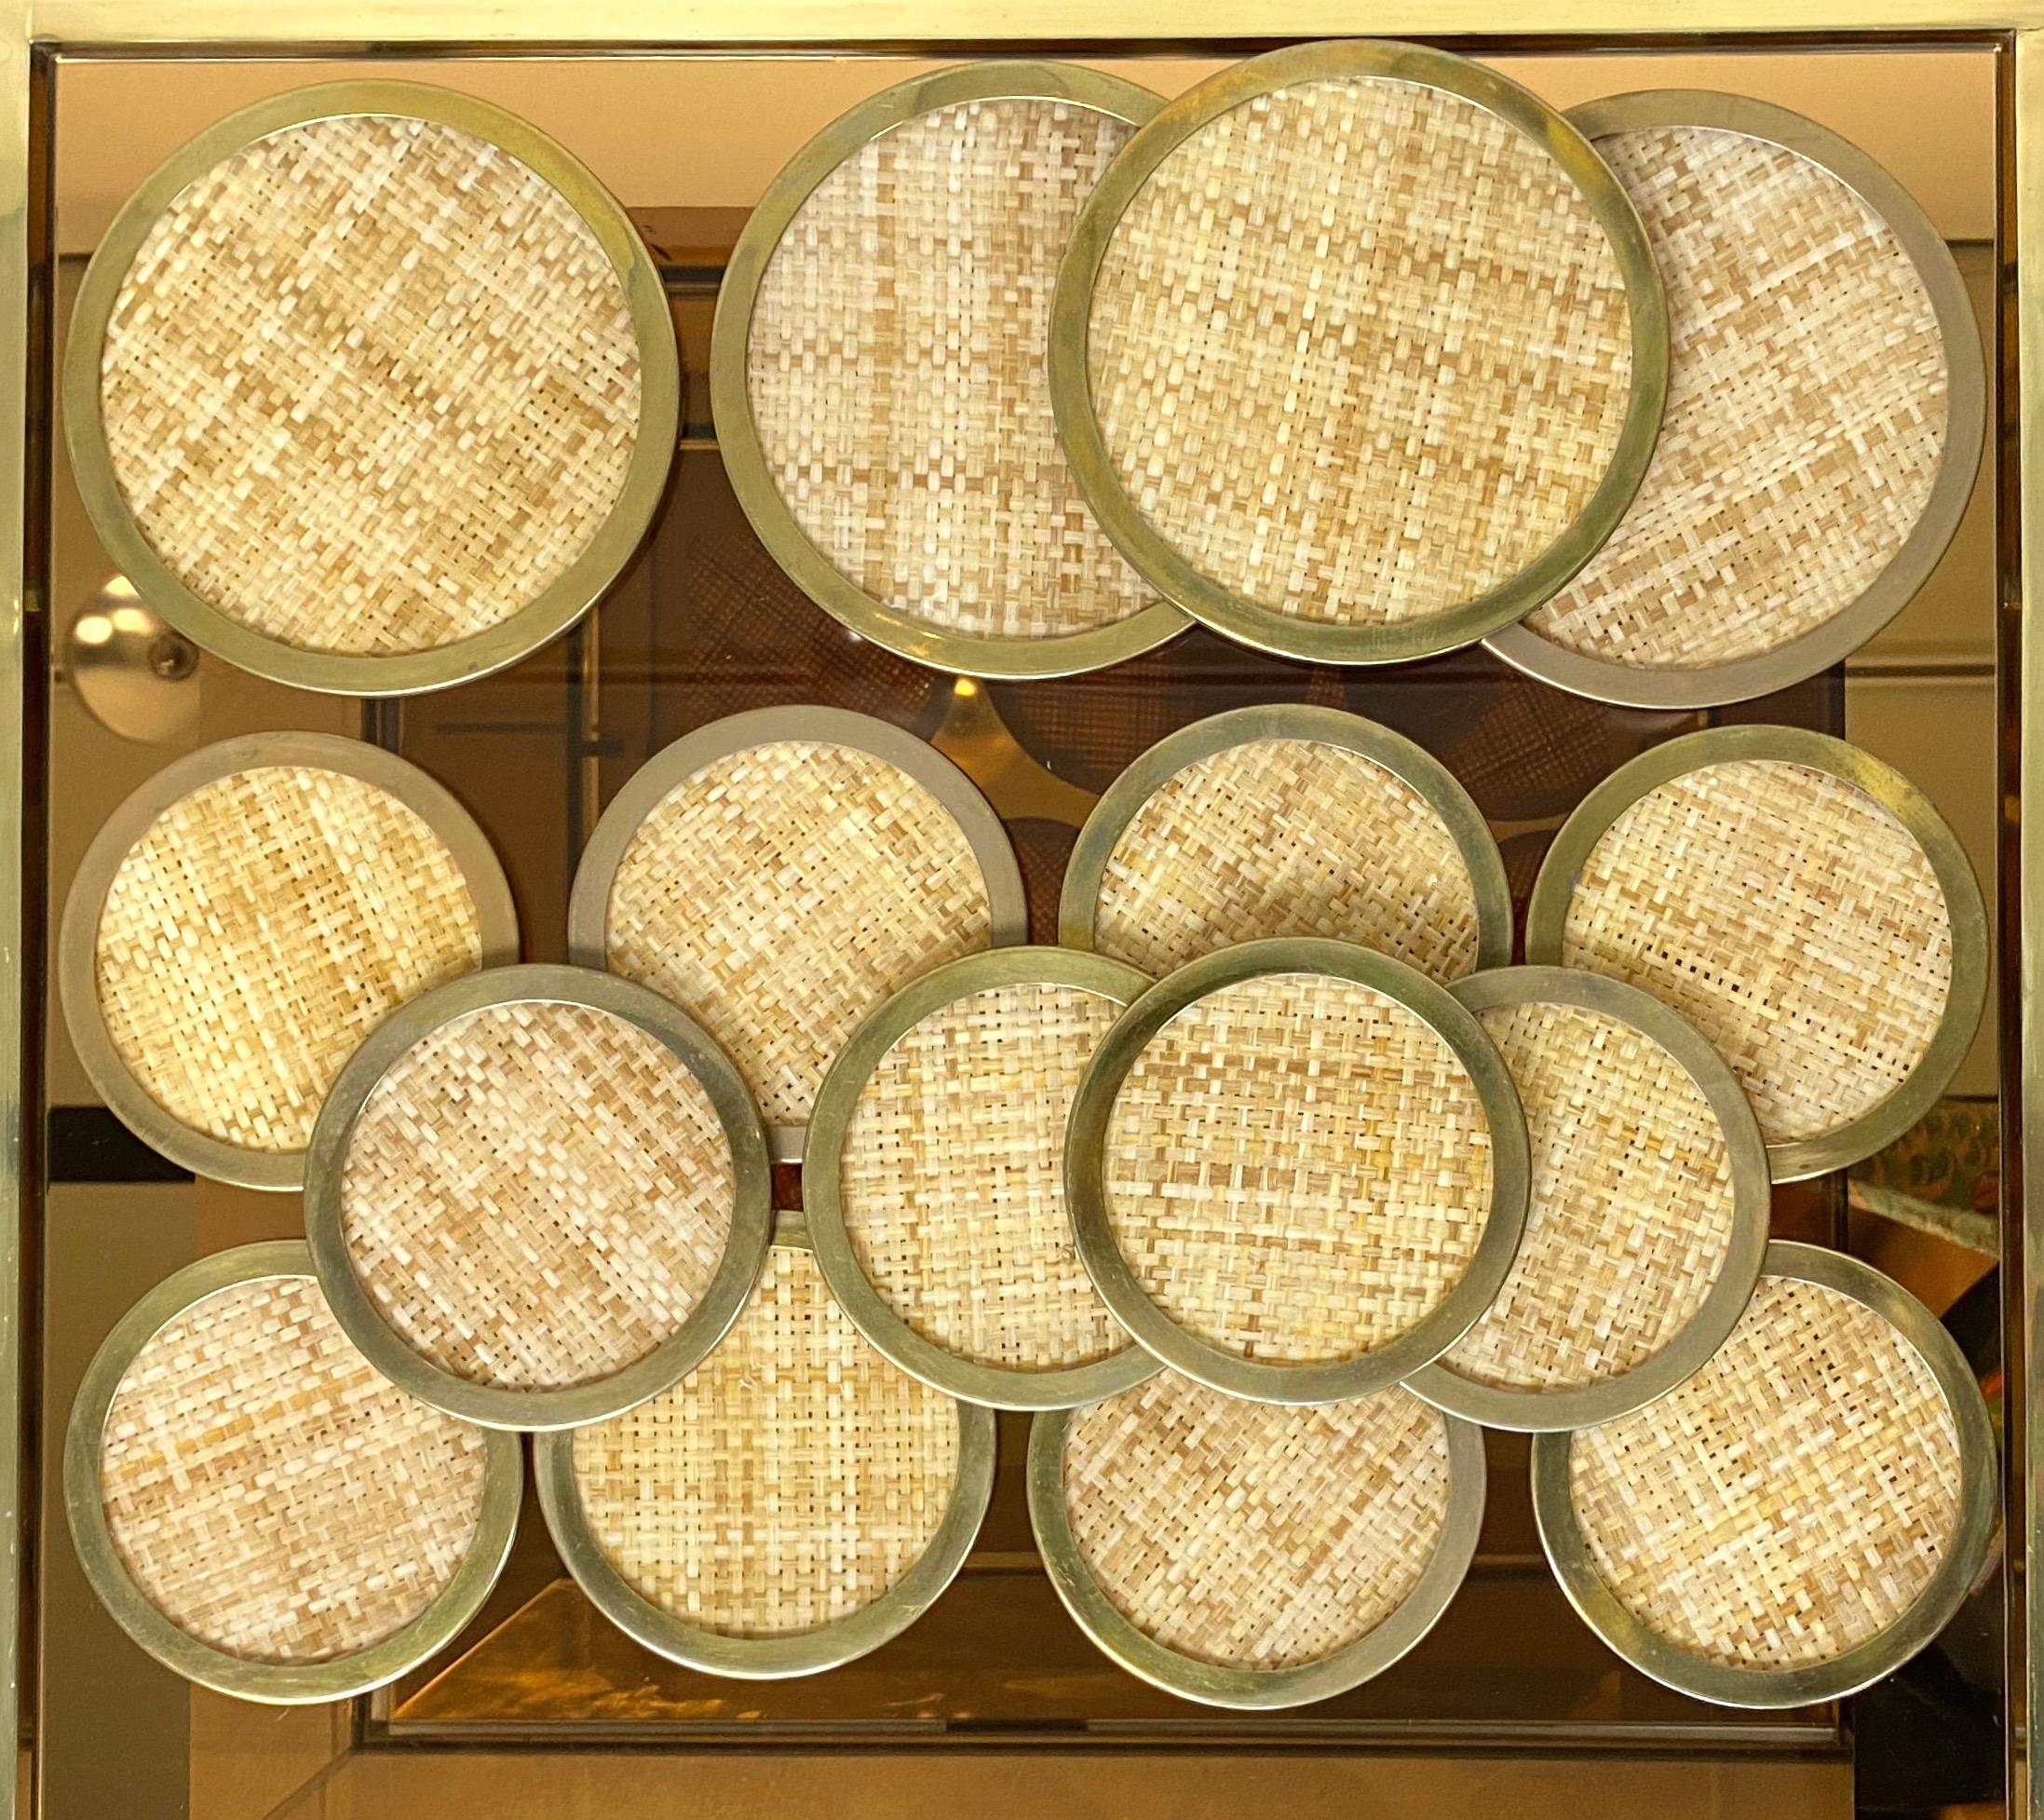 16 total pieces of barware coasters in Lucite and wicker with a brass frame by Christian Dior Home, France, 1970s.

- 12 small size for glasses (diameter 12 cm)
- 4 large size for bottles (diameter 16 cm).